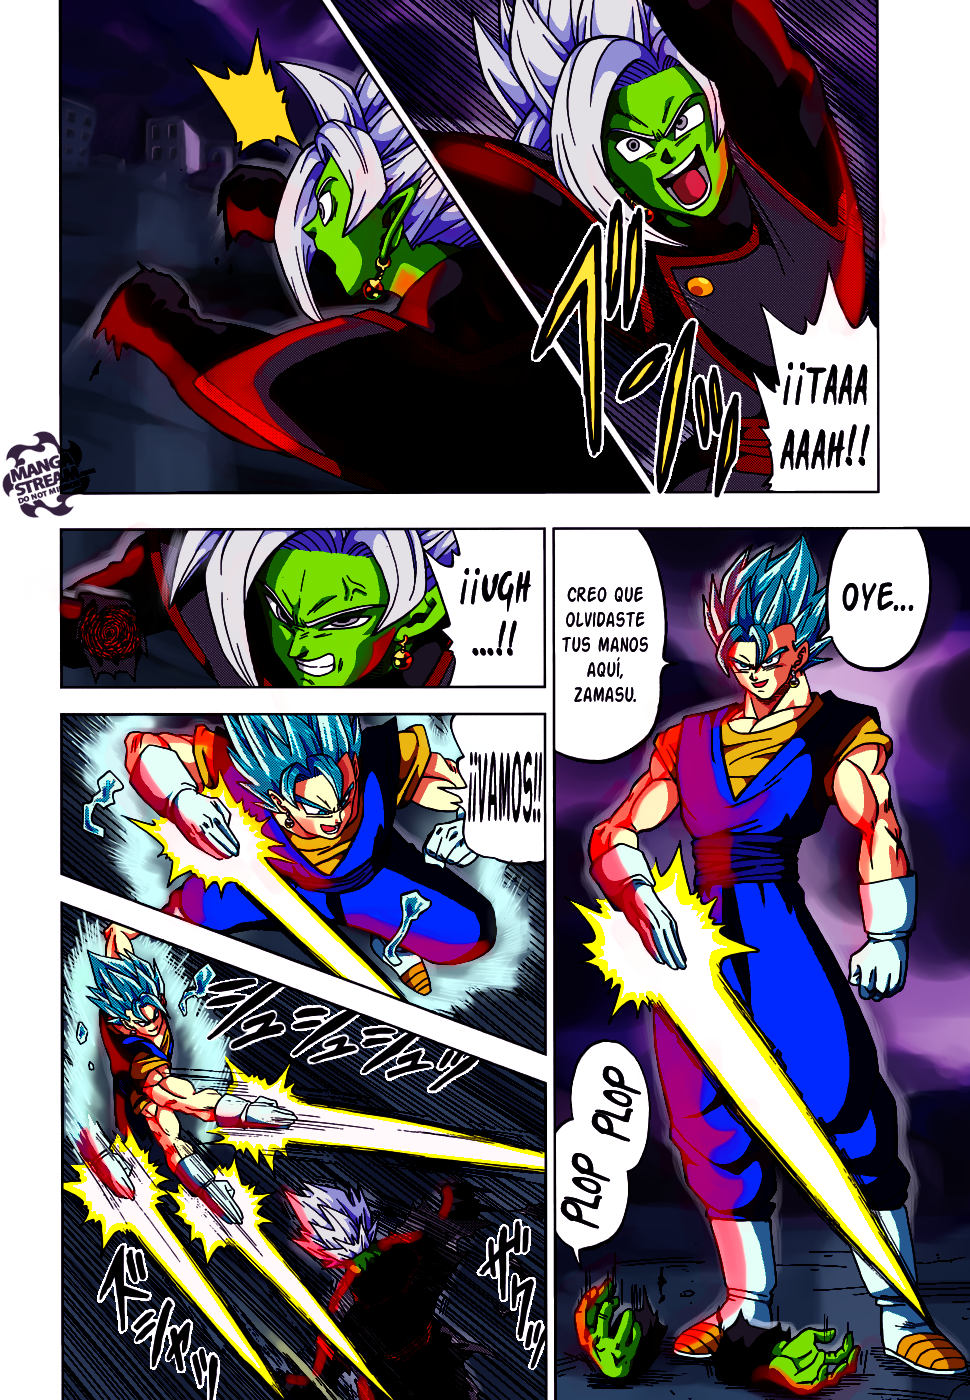 Dragon Ball Super Manga 23 color (first part) by bolman2003JUMP on